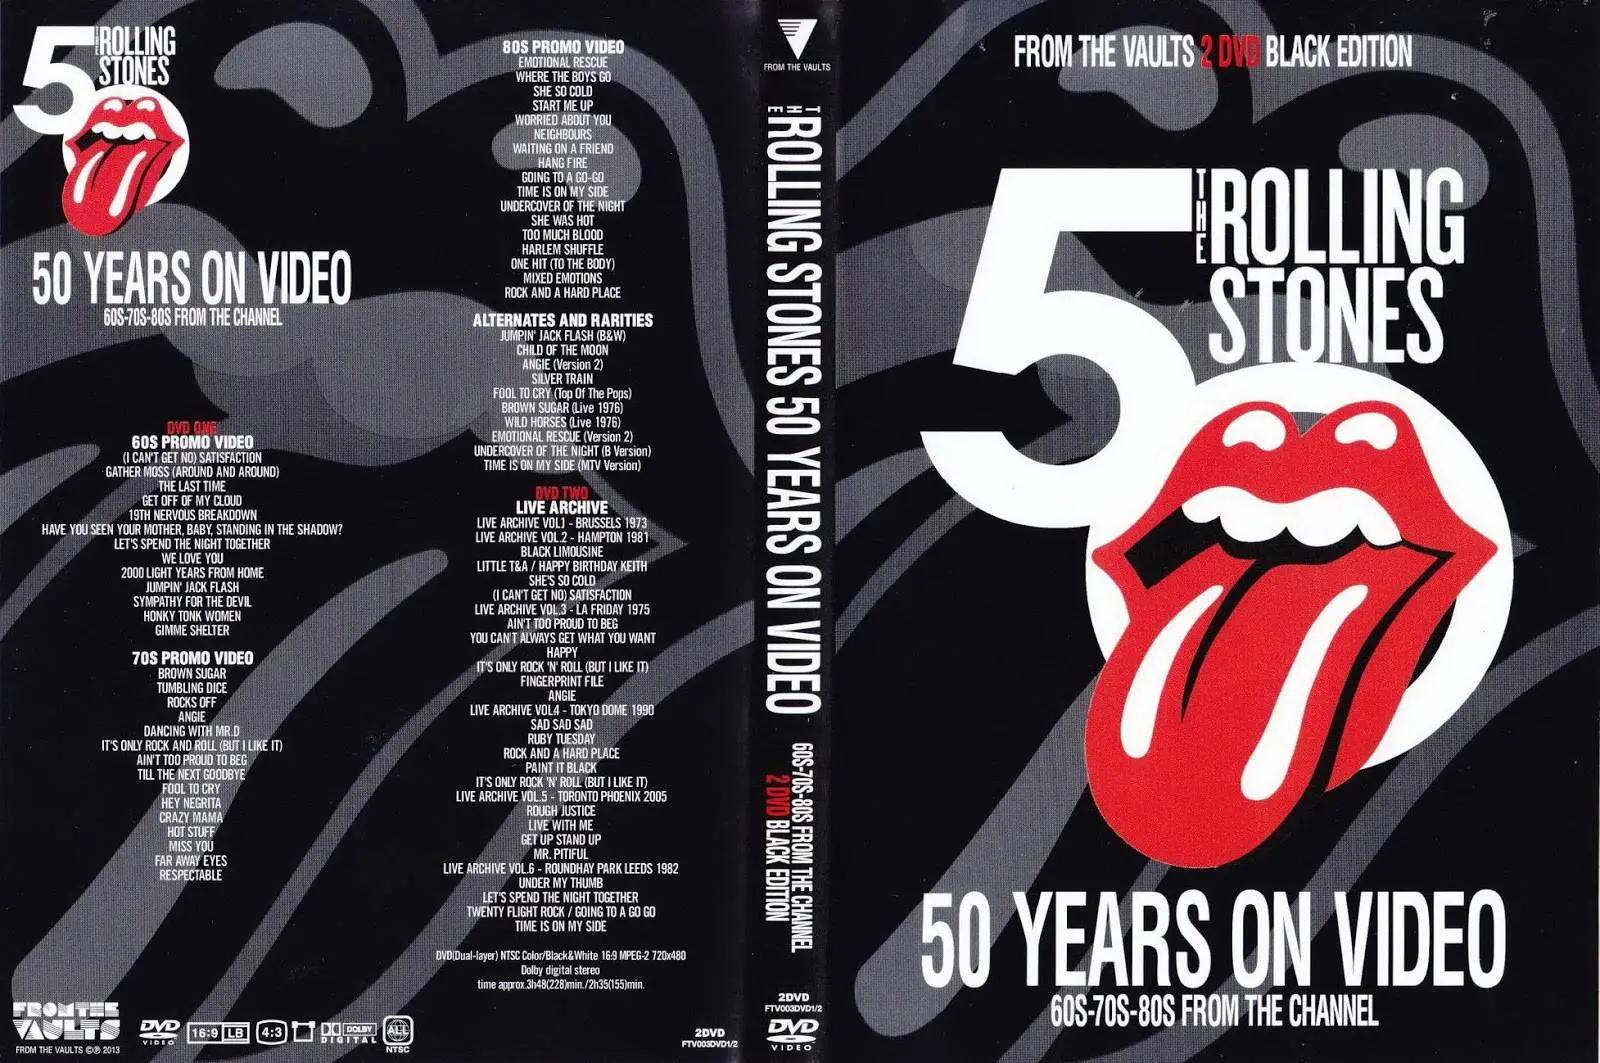 the rolling stones mp3 songs free download